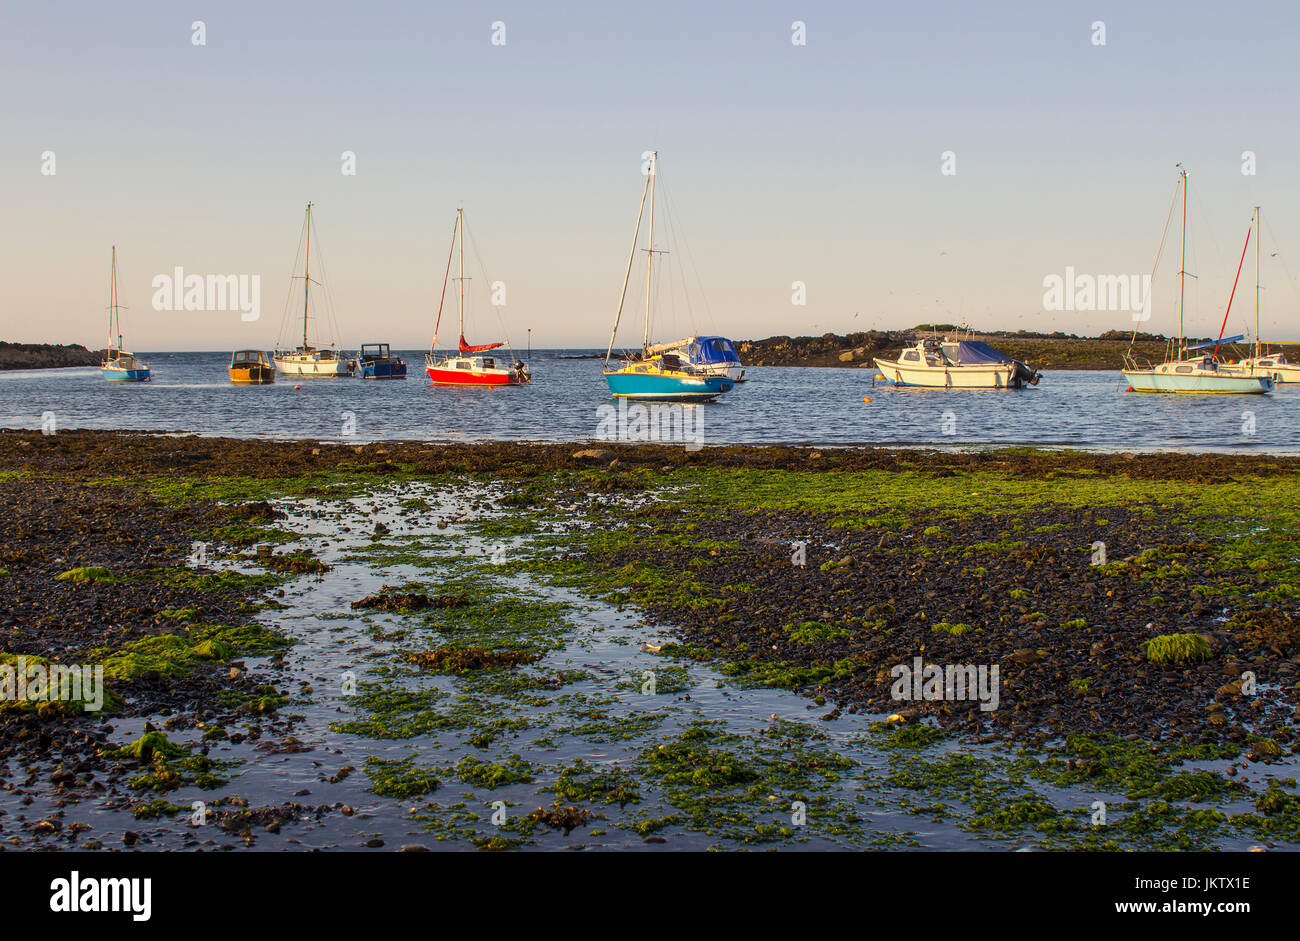 Boats on their moorings beside Cockle Island in the natural tidal harbour at Groomsport in Co Down,Northern Ireland with  Belfast Lough in the backgro Stock Photo